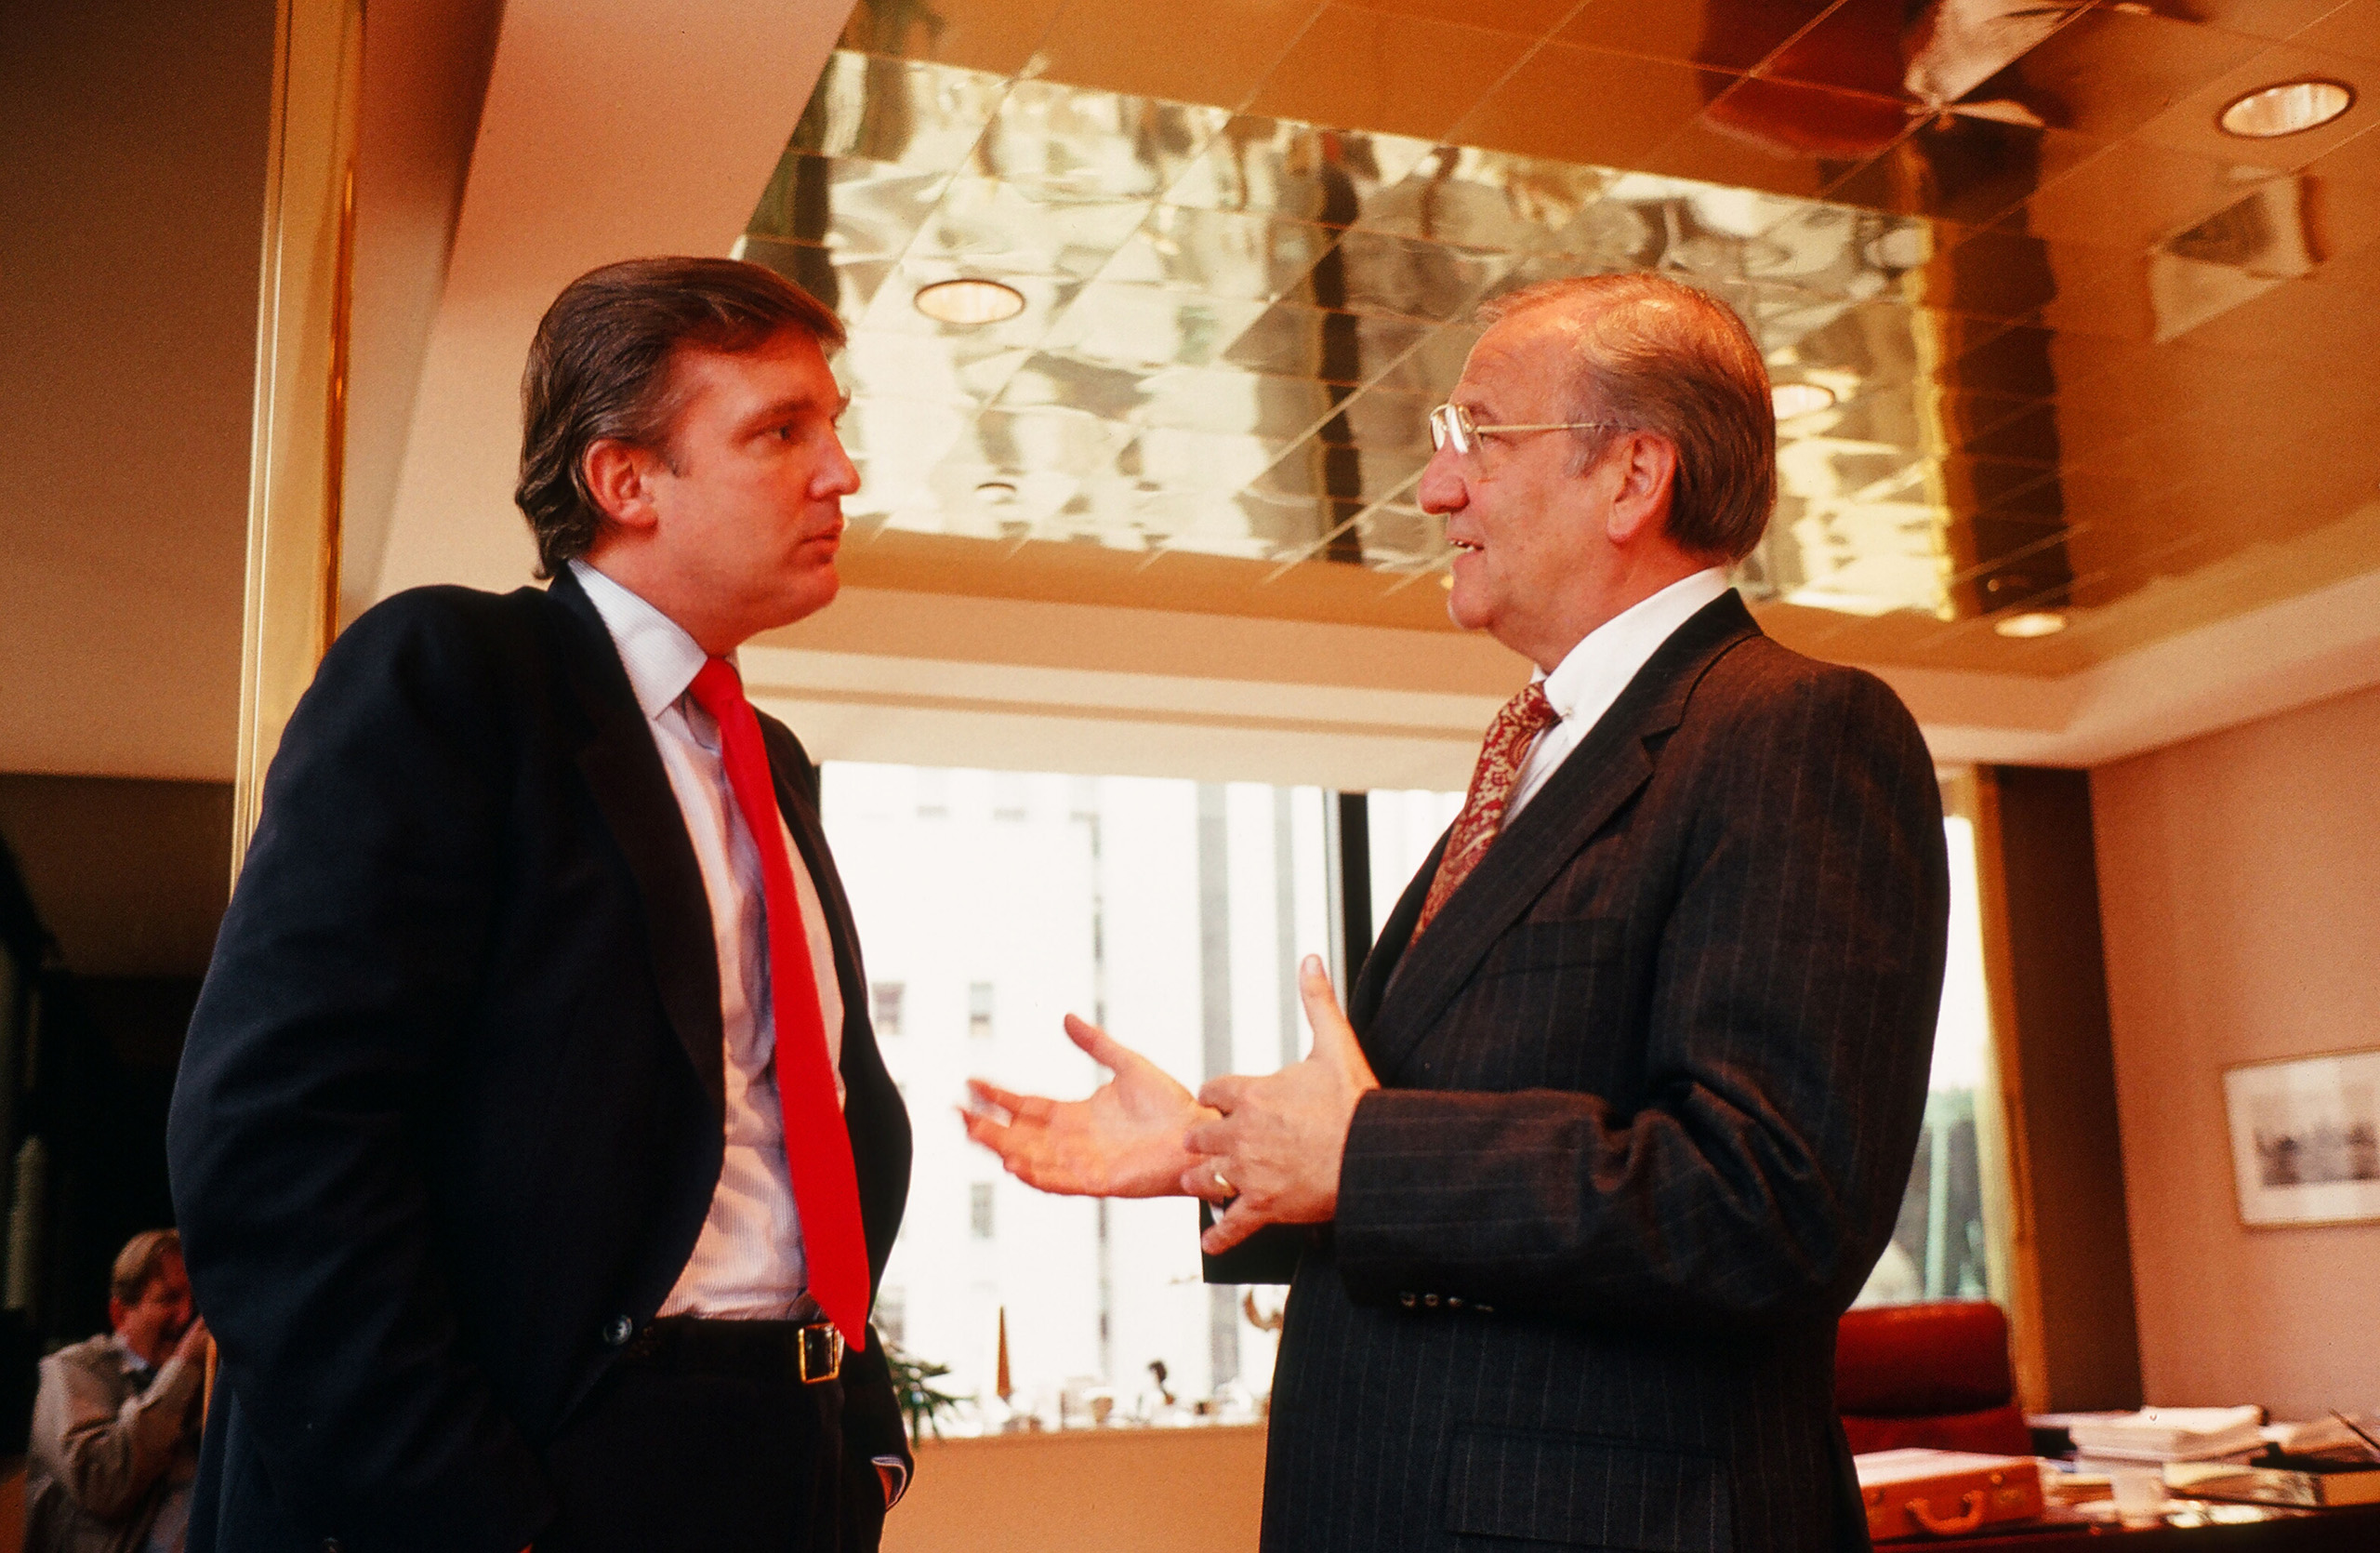 American businessman Donald Trump (left) meets with Chrysler CEO Lee Iacocca at Trump's office, in New York City in 1987.